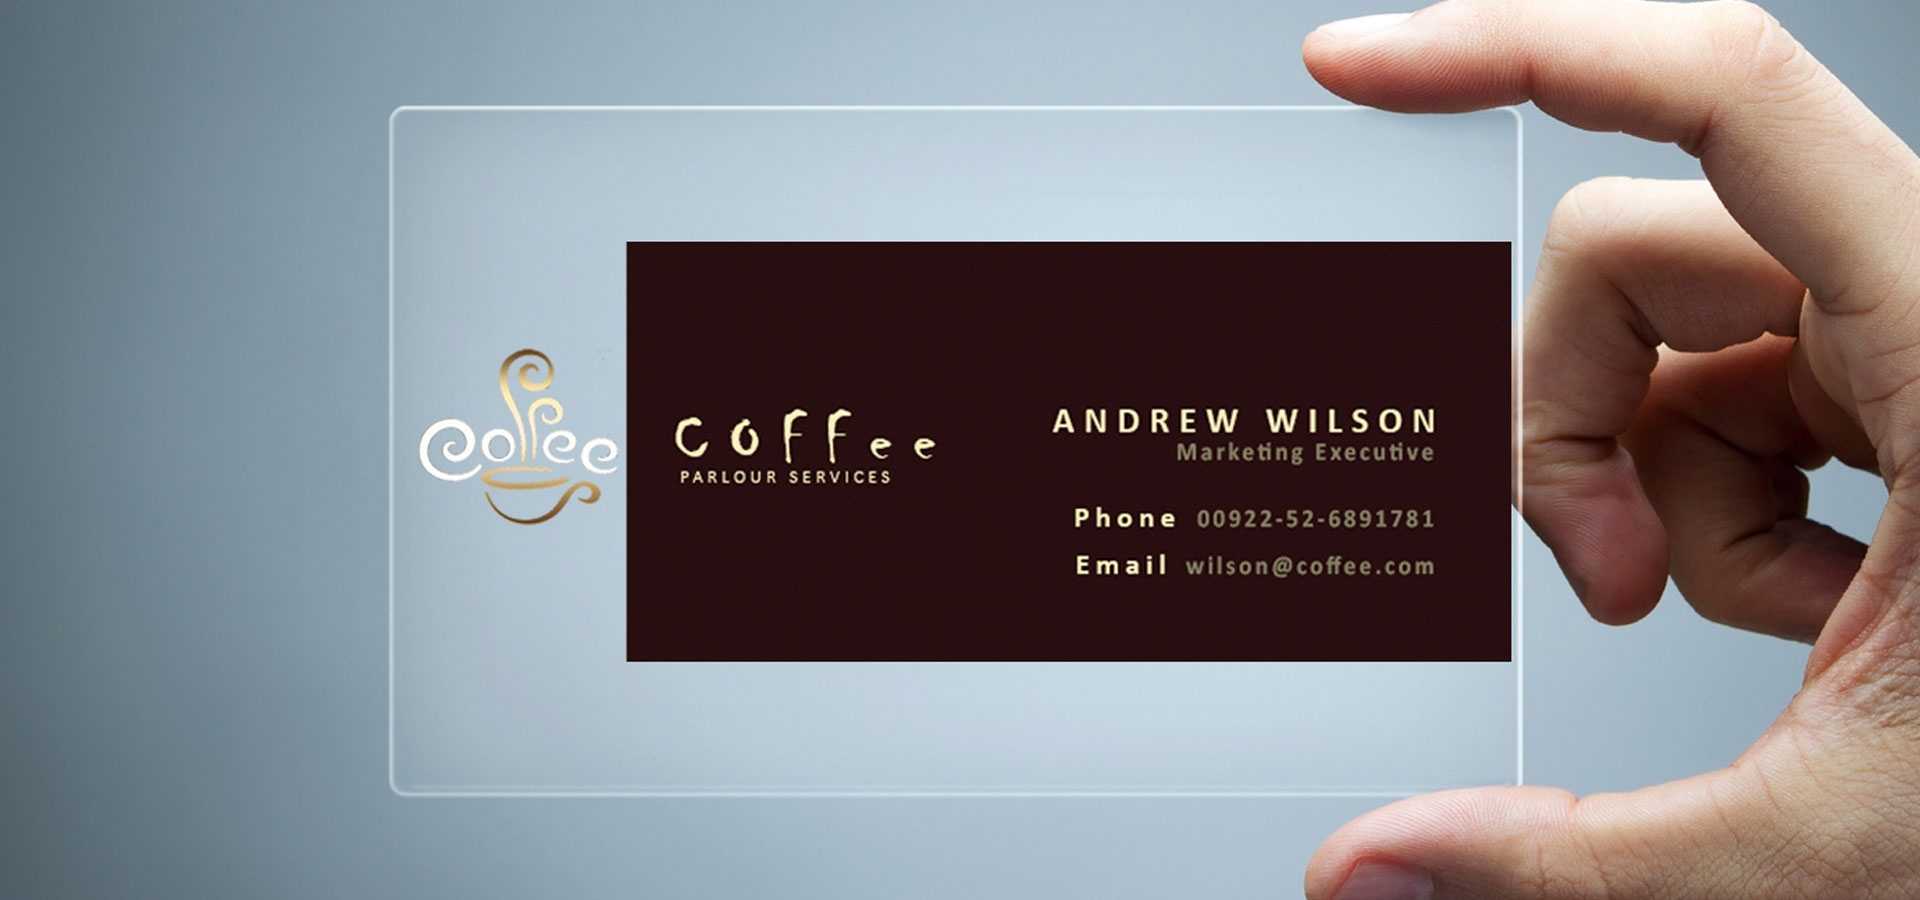 26+ Transparent Business Card Templates – Illustrator, Ms With Regard To Calling Card Free Template